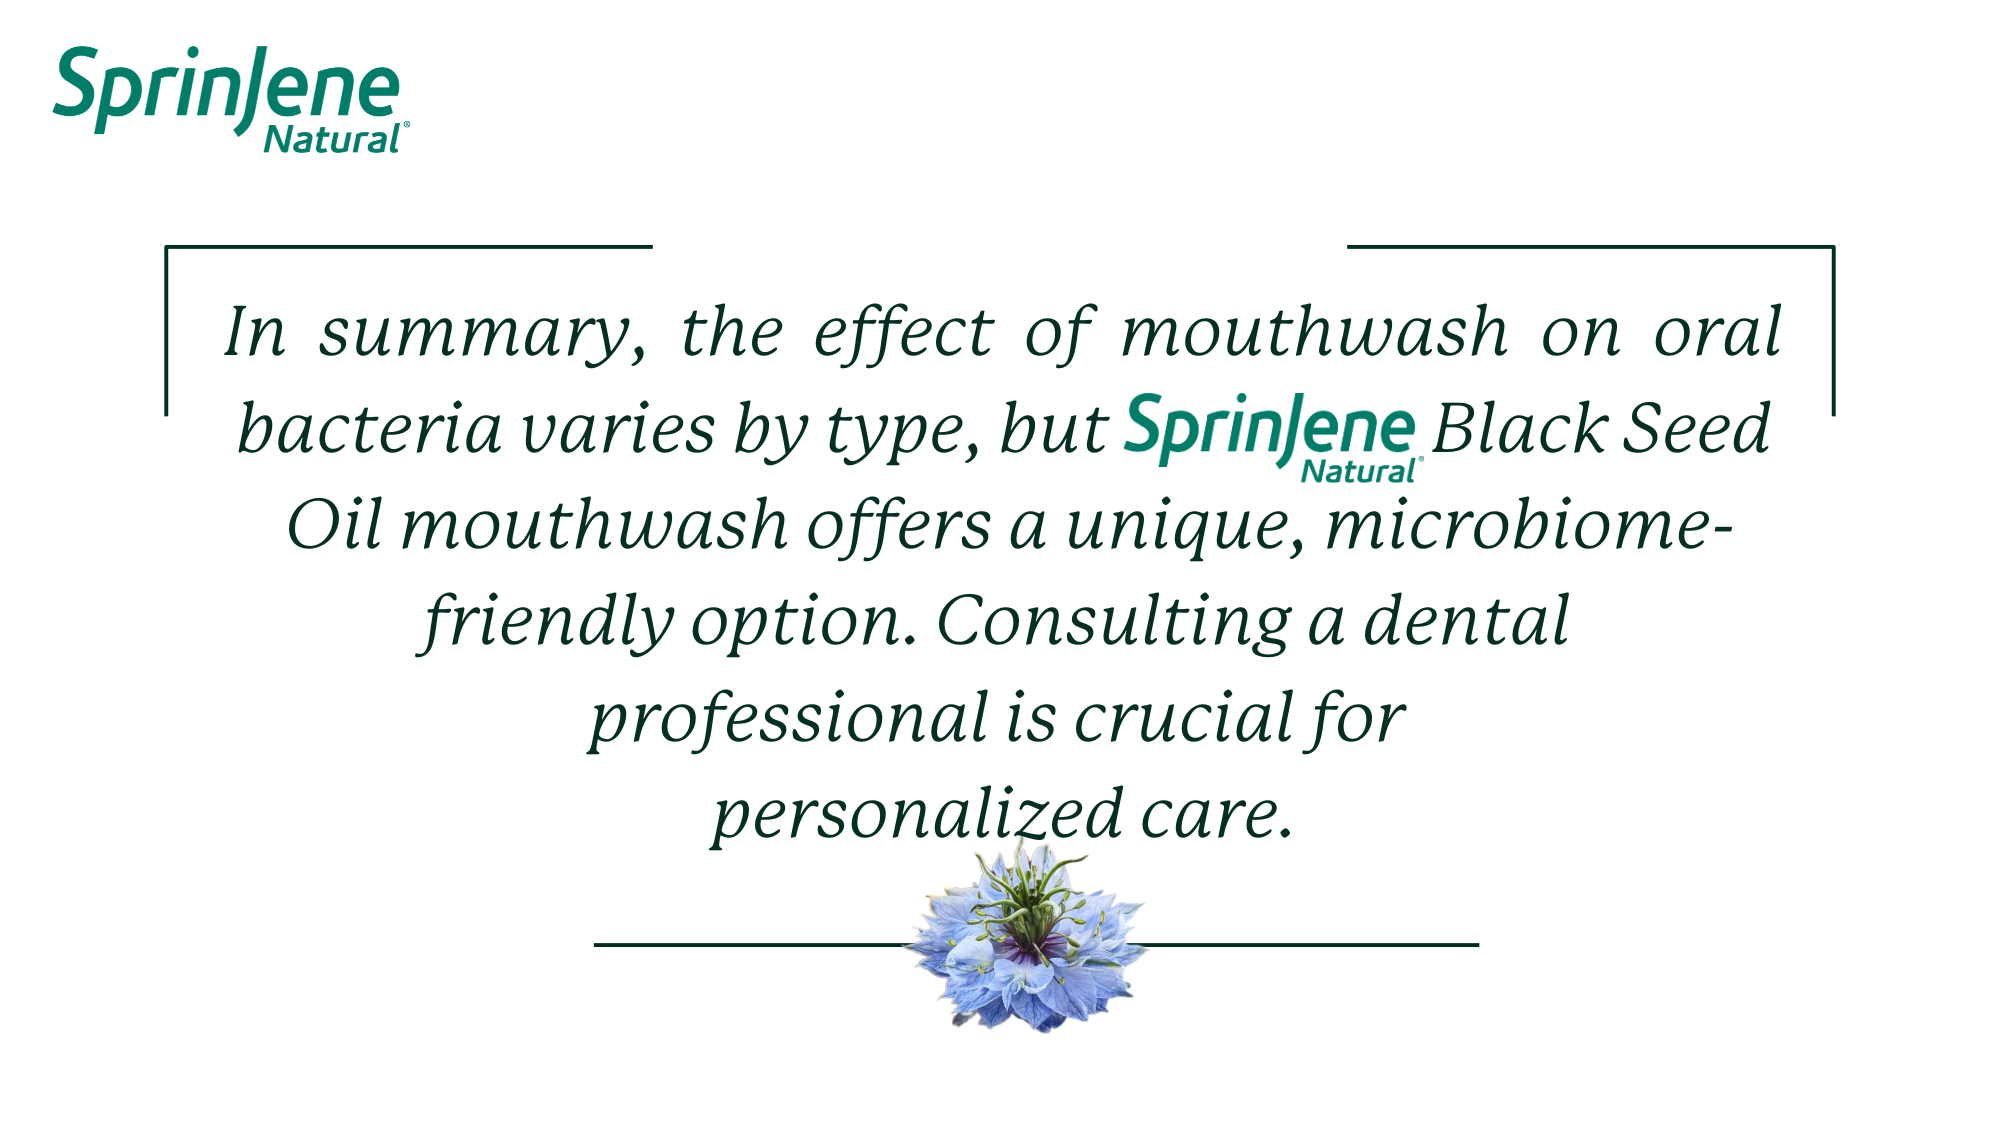 In  summary,  the  effect  of  mouthwash  on  oral bacteria varies by type, but                      Black Seed  Oil mouthwash offers a unique, microbiome-friendly option. Consulting a dental  professional is crucial for  personalized care.